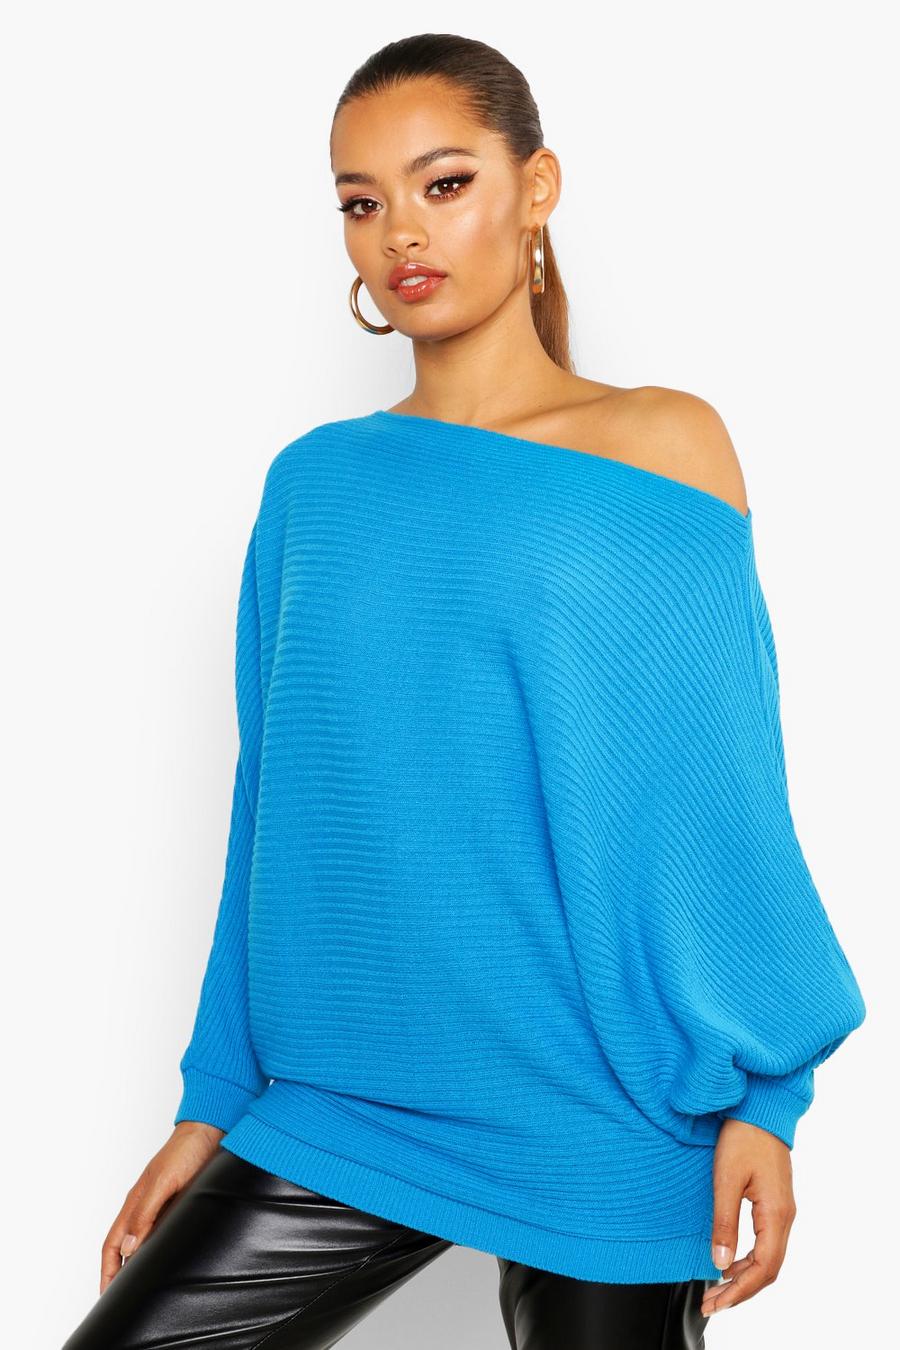 Peacock Oversized Rib Knit Batwing Sweater image number 1